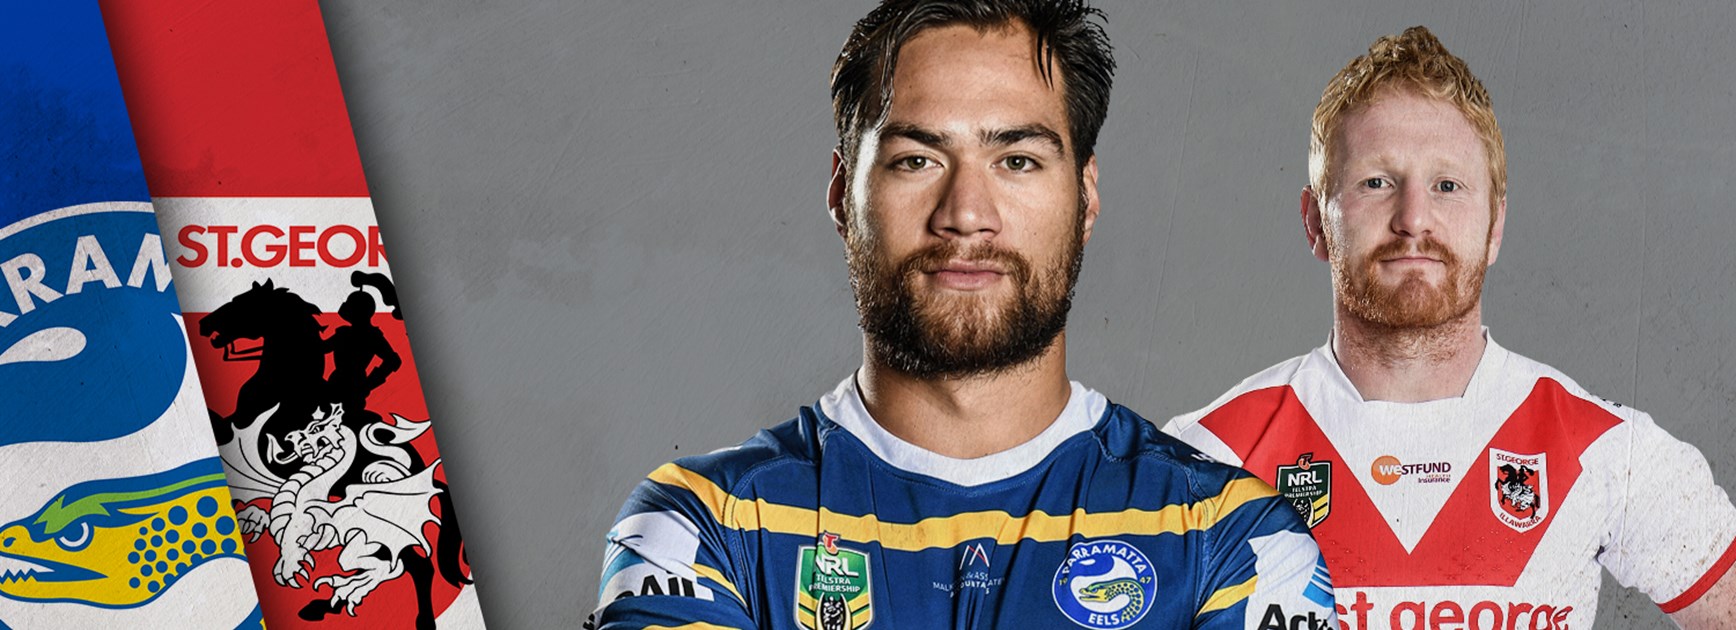 Eels v Dragons, Round 22 Match Preview